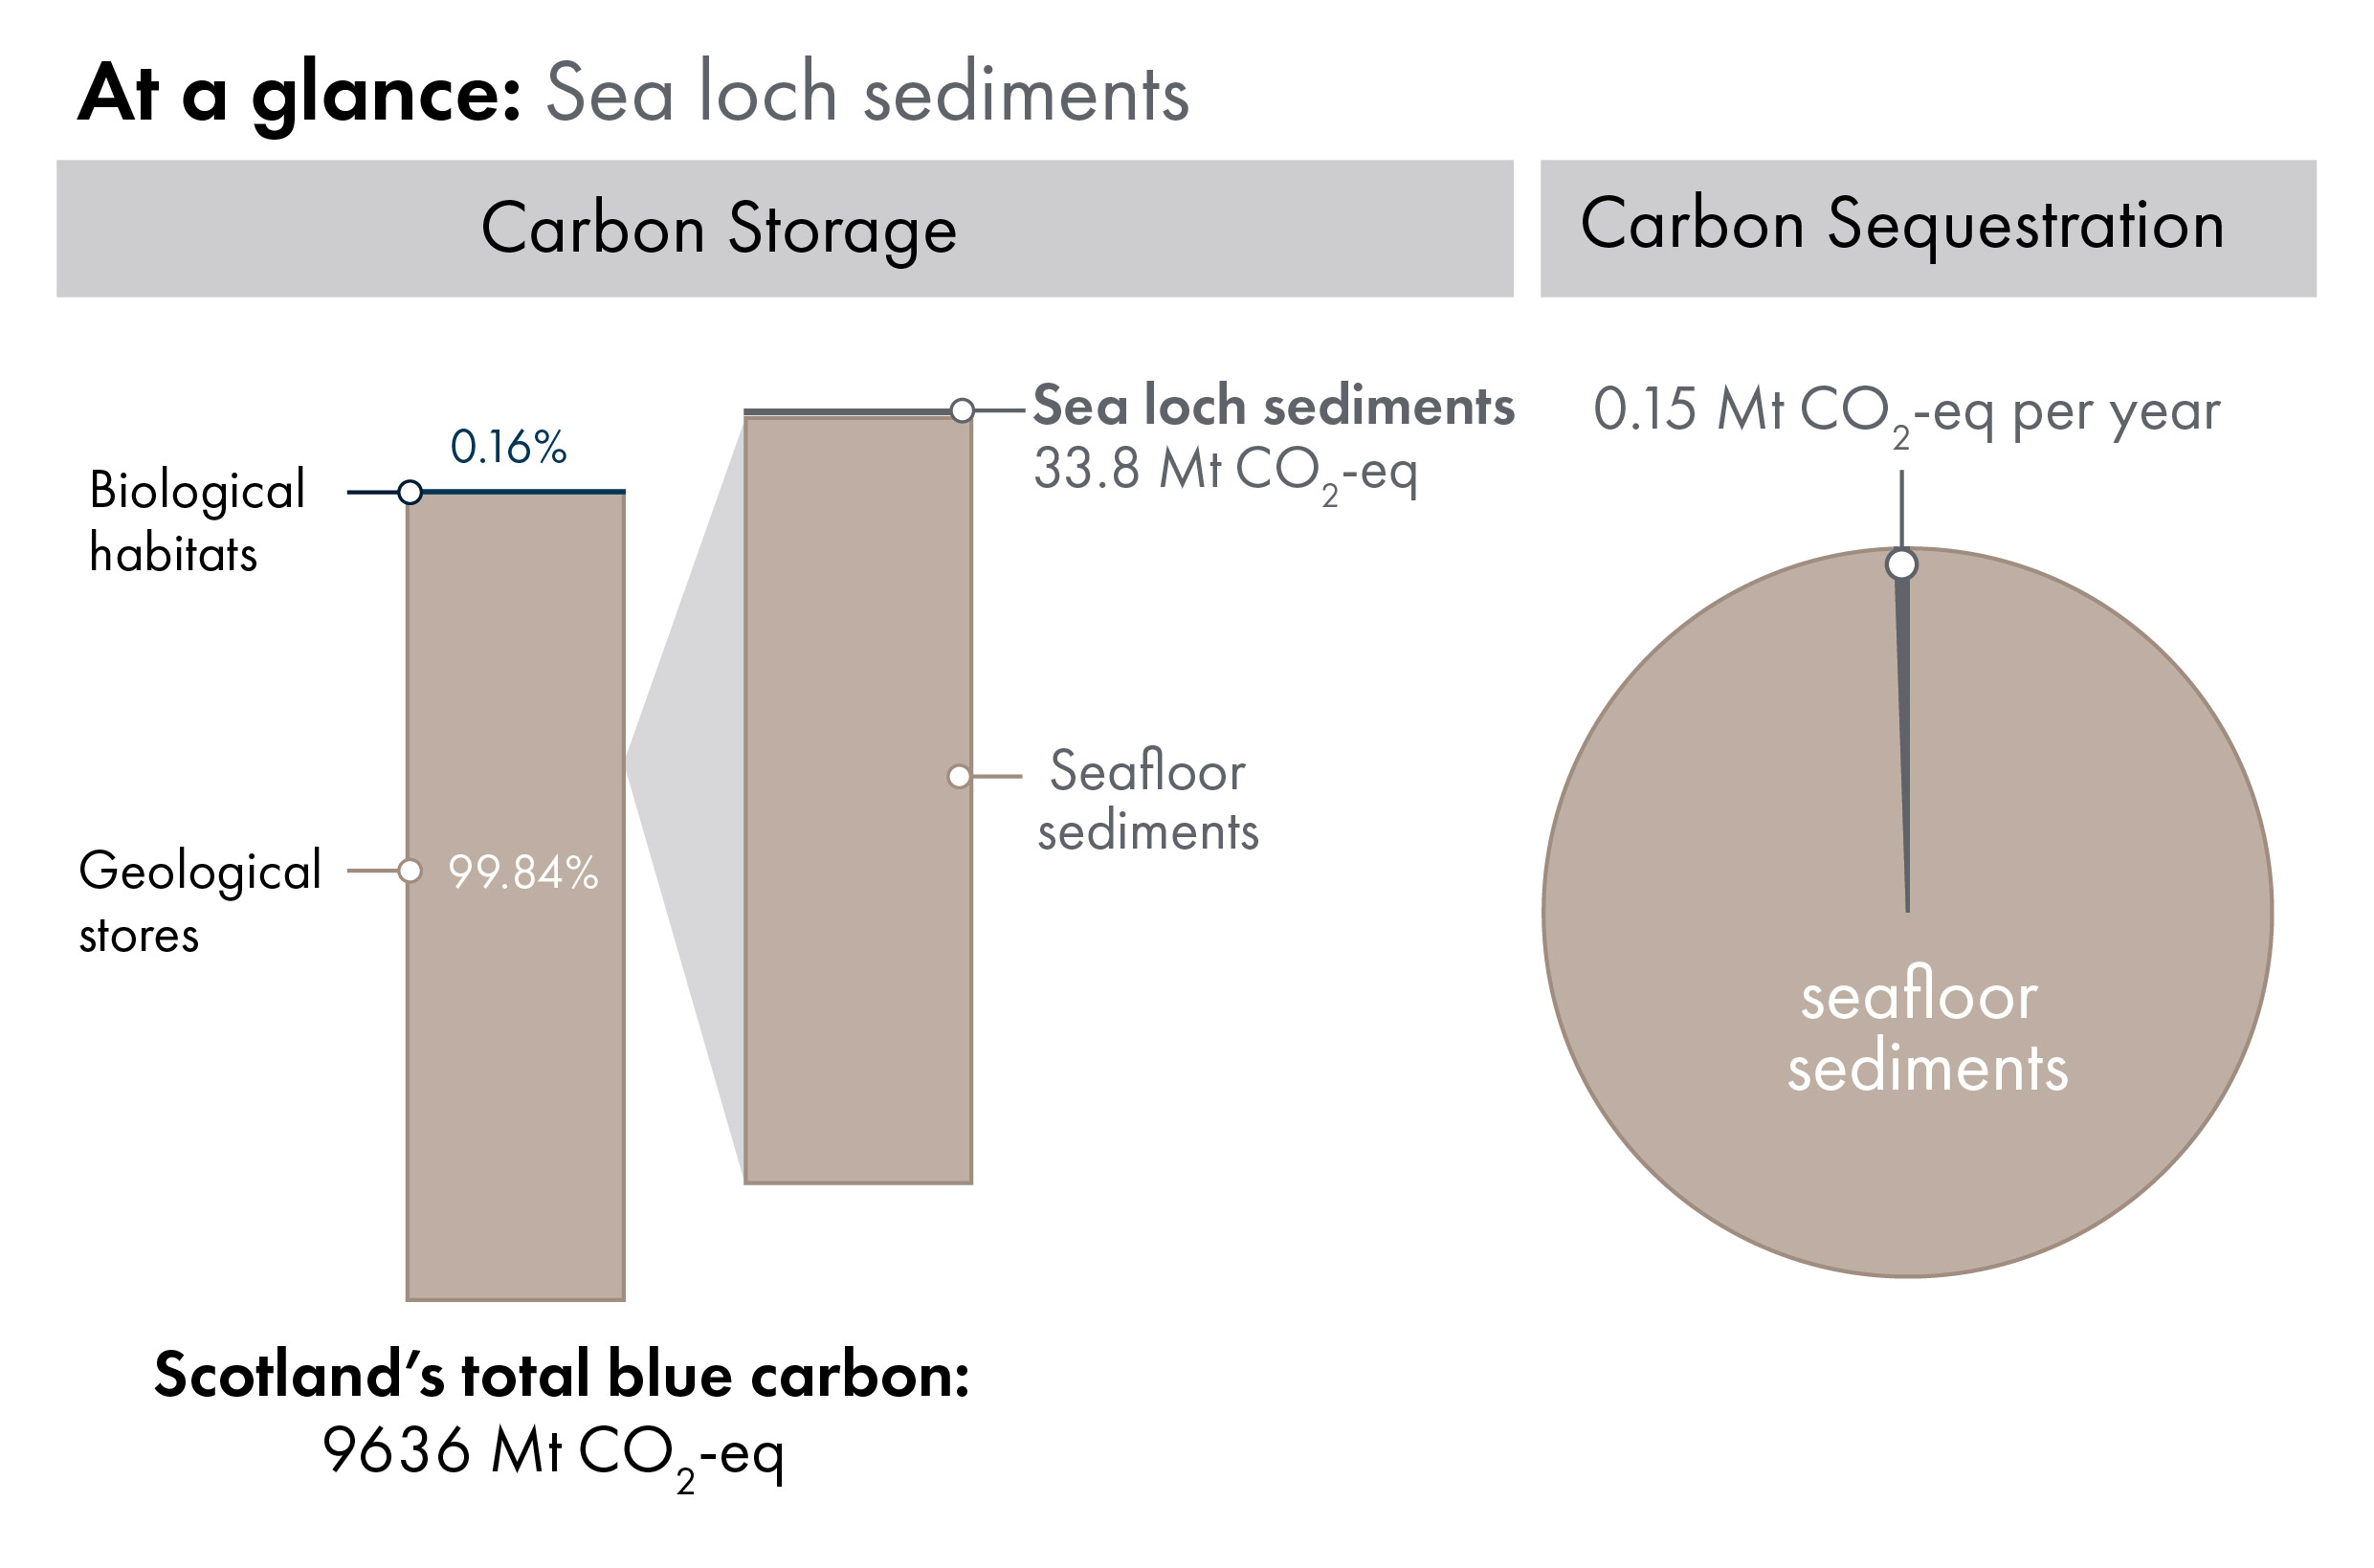 Bar charts showing the proportion of Scotland's blue carbon which is in geological stores (99.84%) versus carbon in biological habitats and species (0.16%). Inset bar chart shows the proportion of carbon in biological habitats which sea loch sediment carbon storage (1.2 megatonnes of carbon dioxide equivalent). Pie chart showing, out of all geological stores, the proportion which is sequestered annually by sea loch sediments.